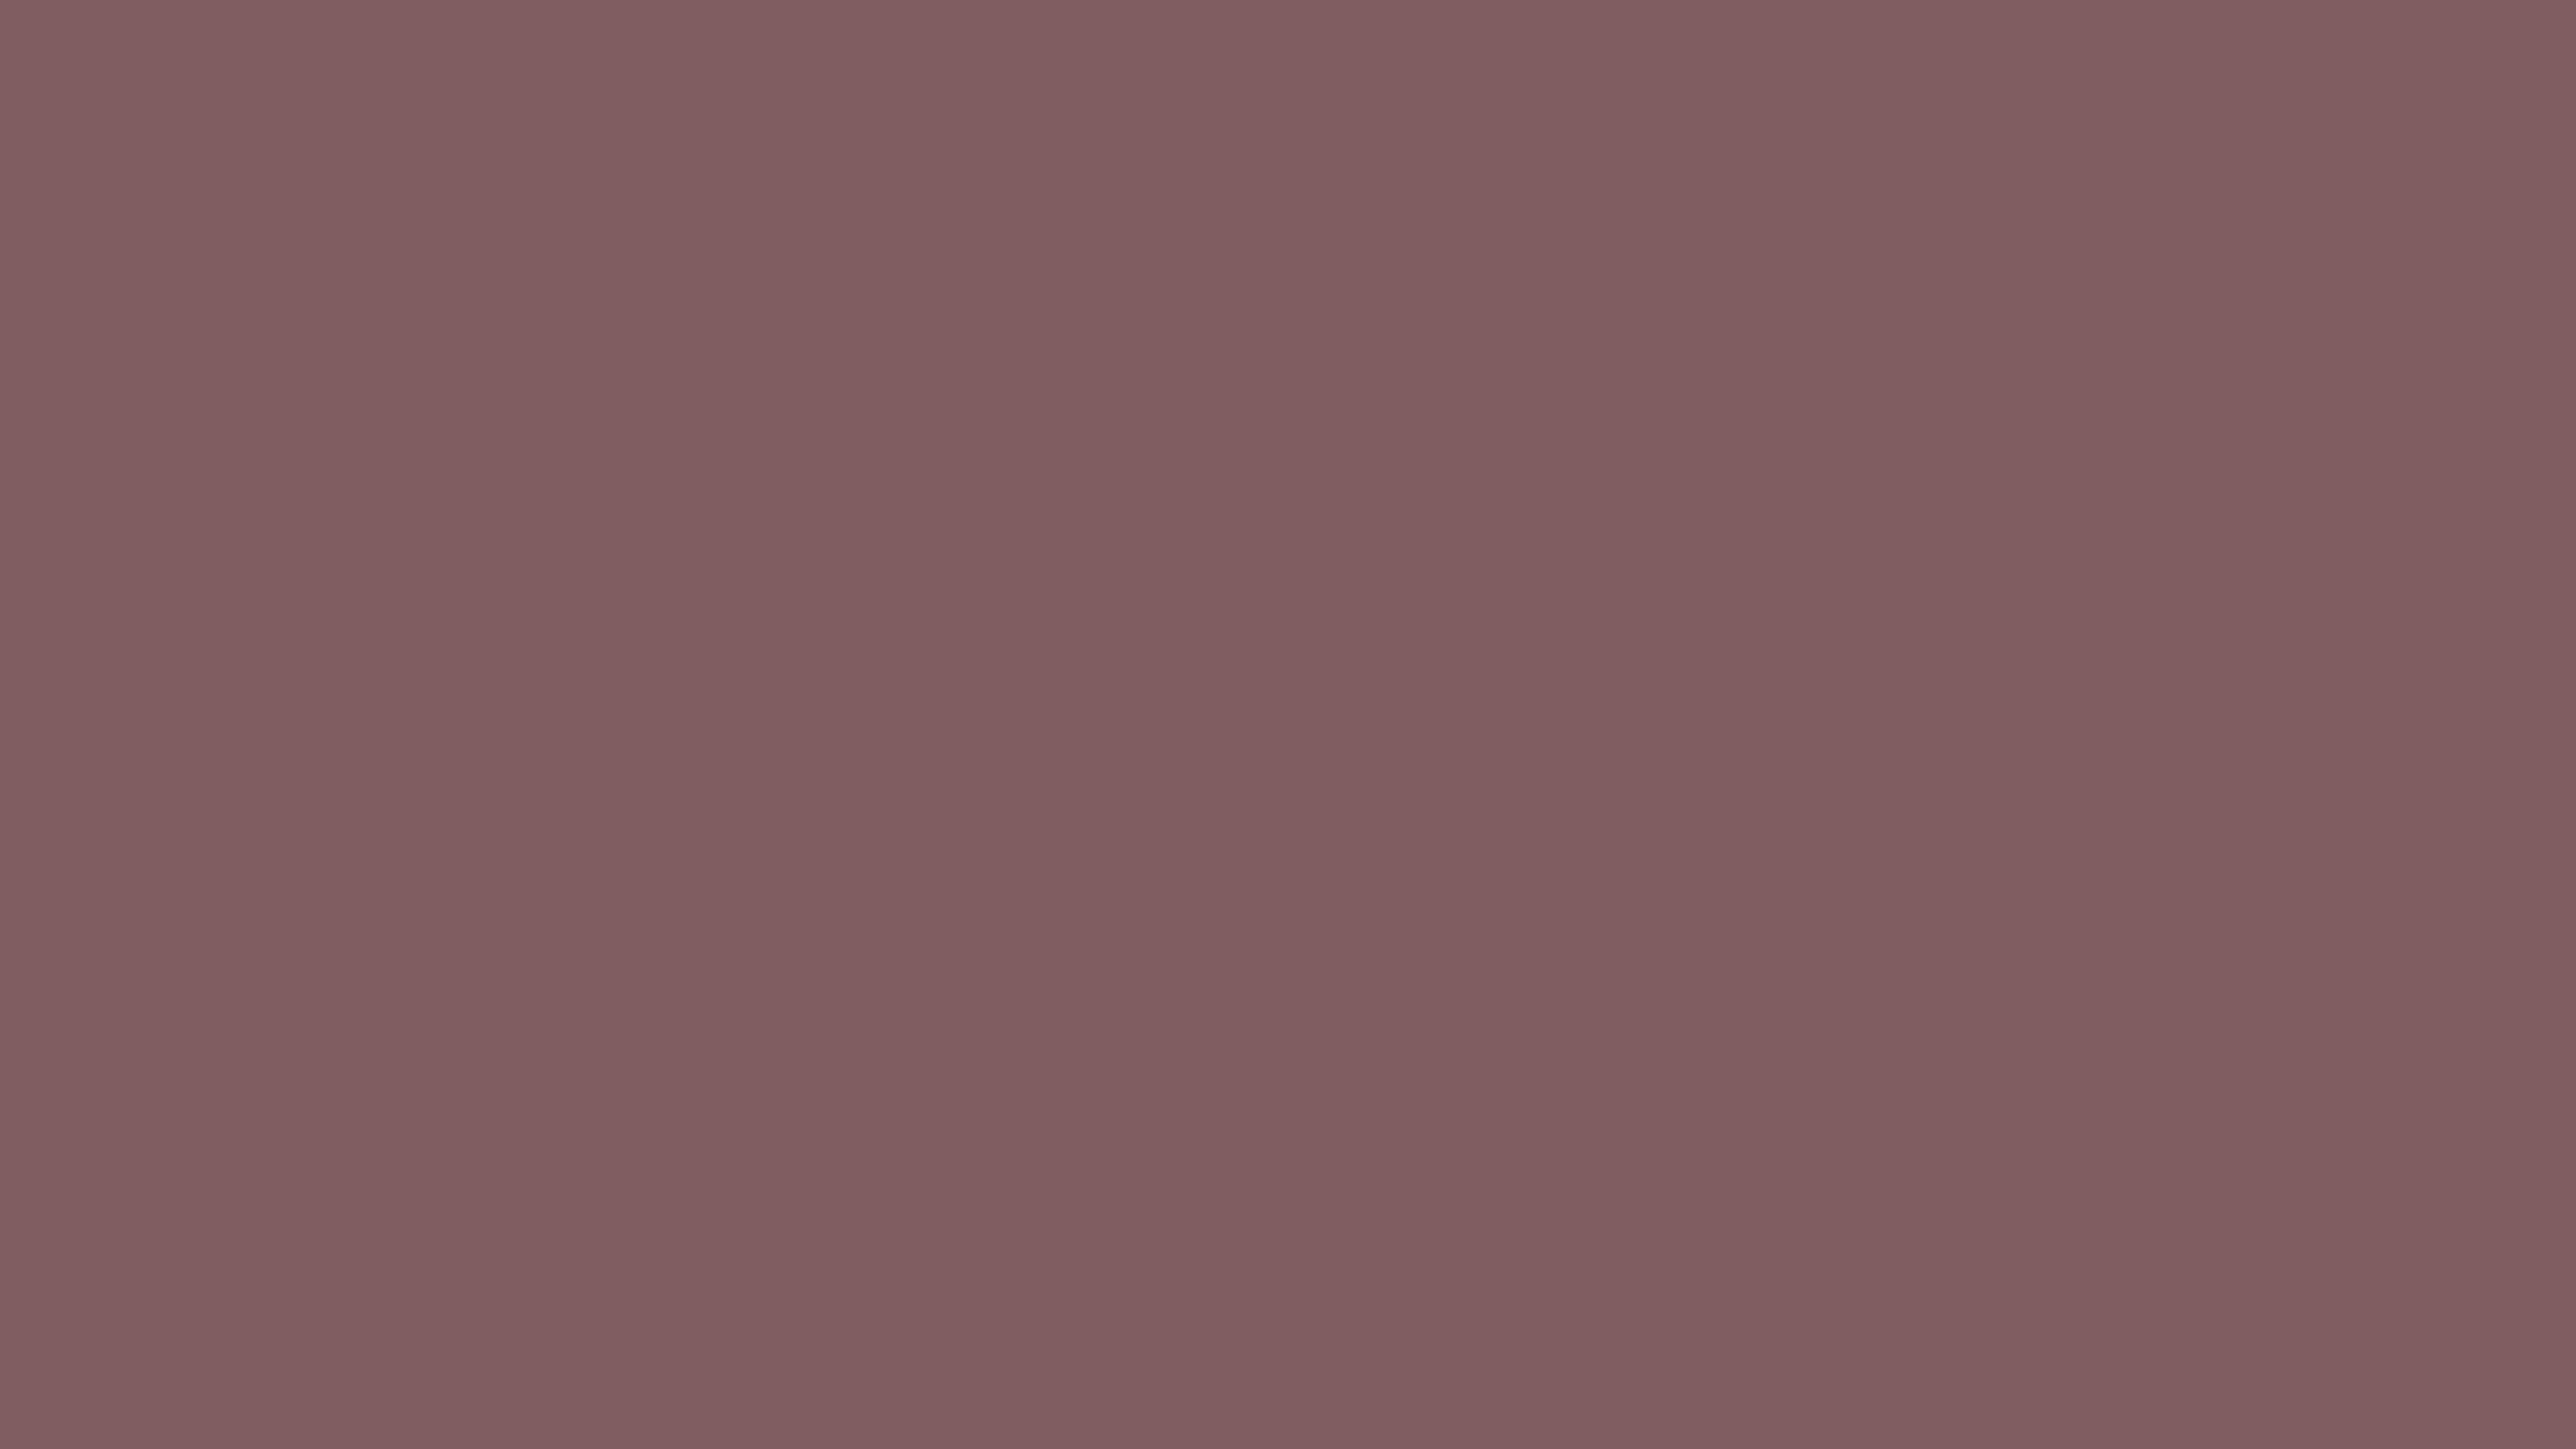 51x Deep Taupe Solid Color Background